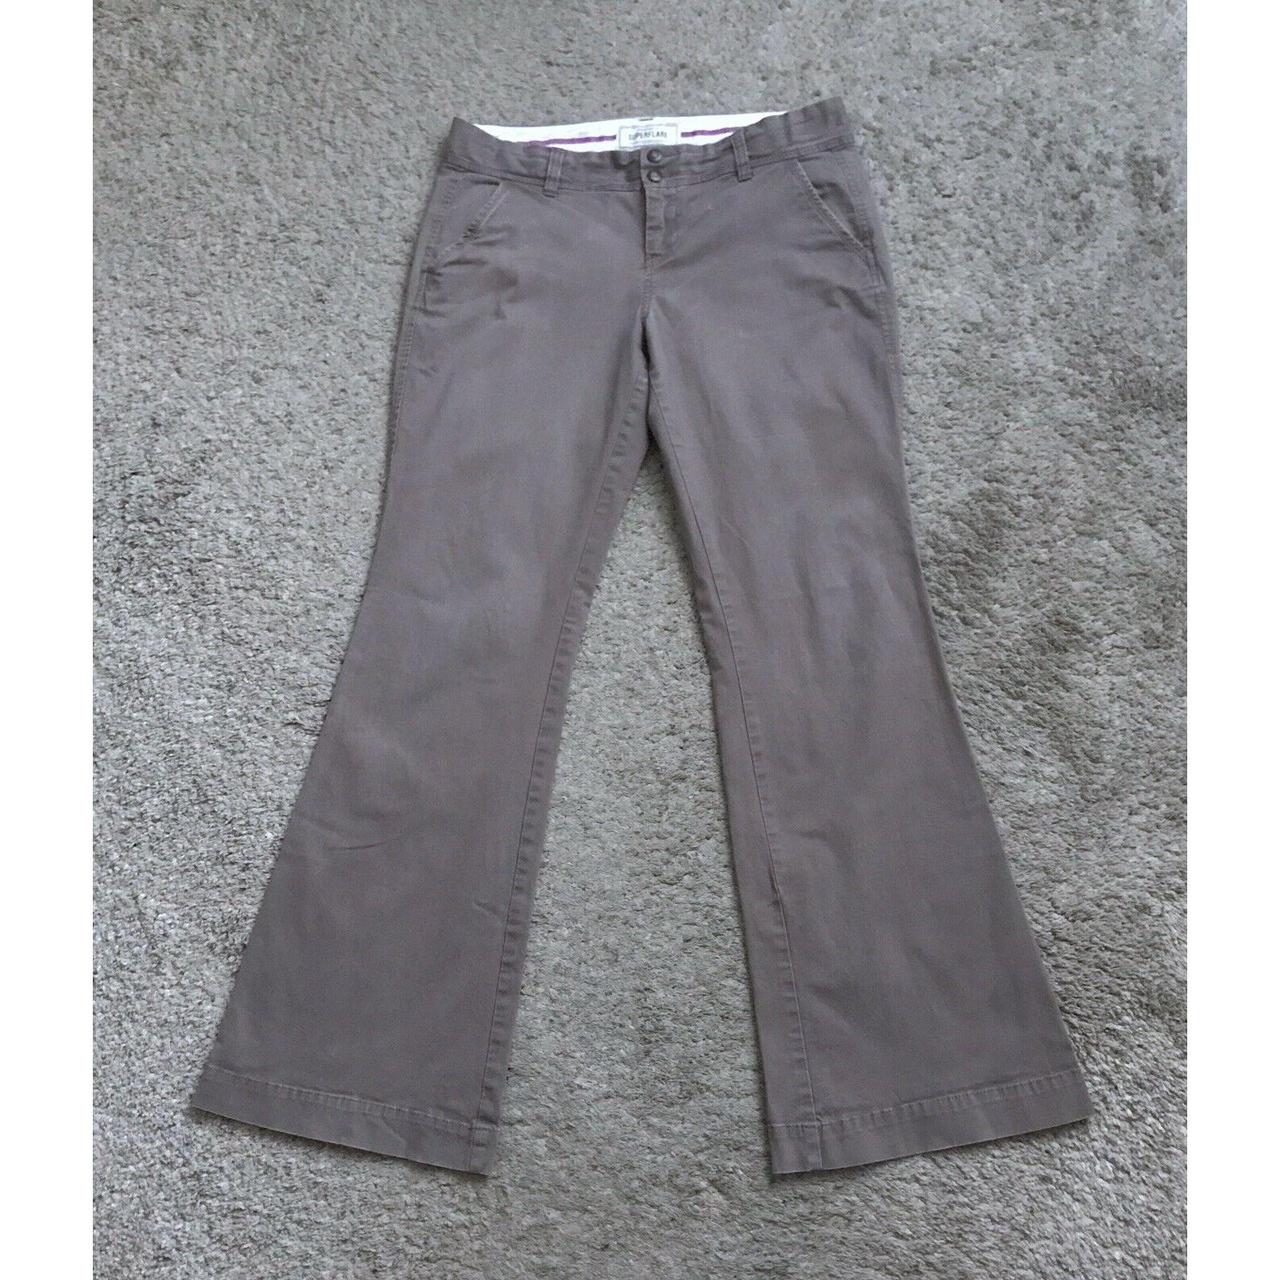 Product Image 1 - OLD NAVY Womens Size 6